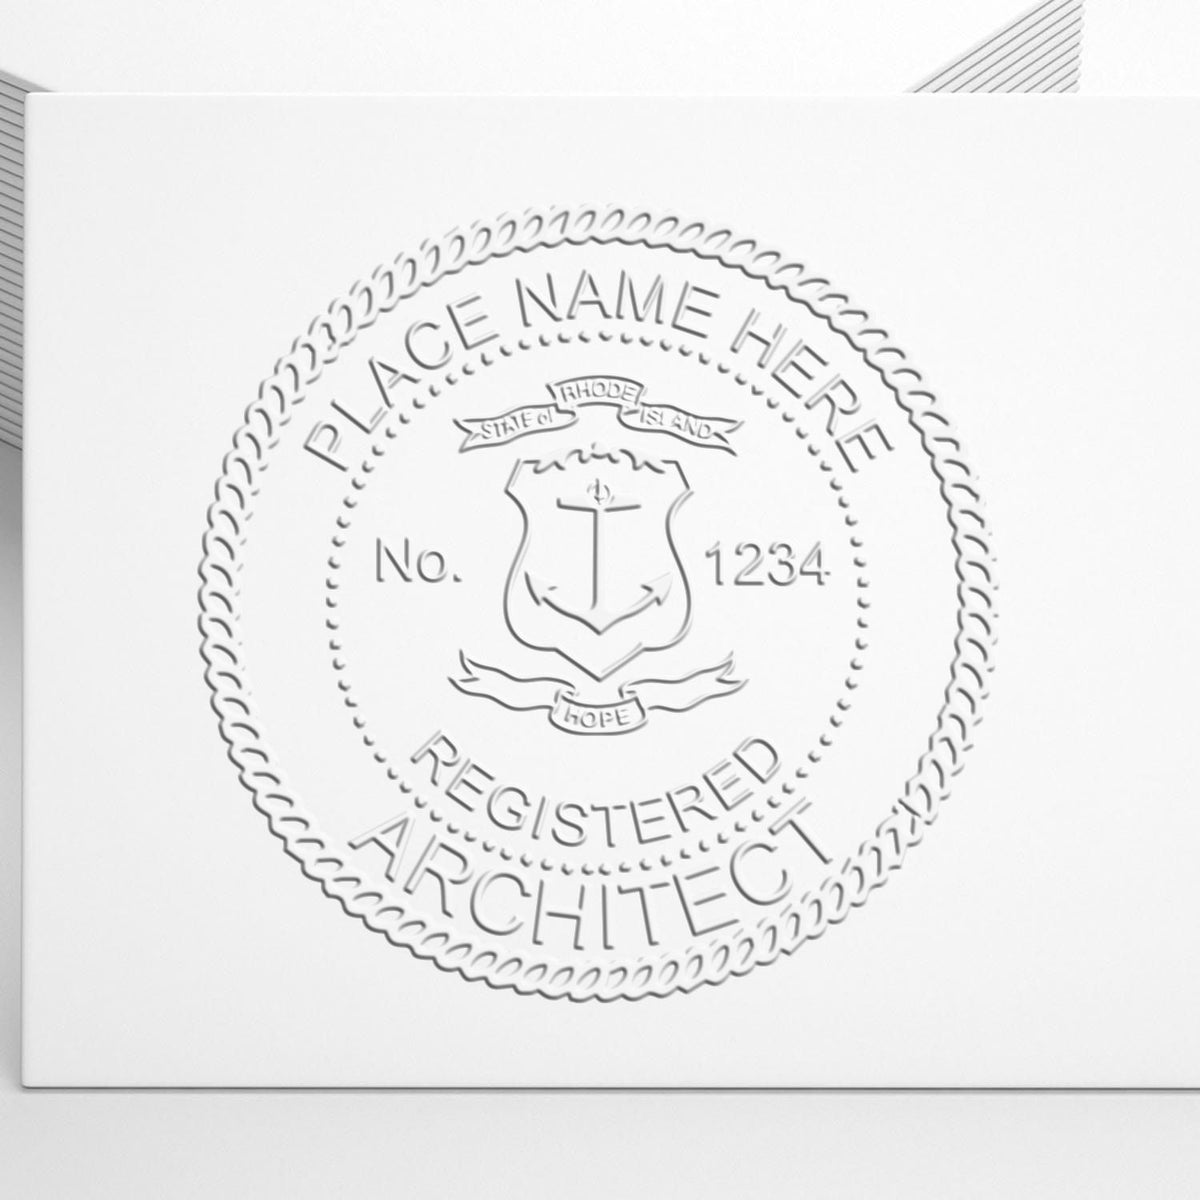 The State of Rhode Island Architectural Seal Embosser stamp impression comes to life with a crisp, detailed photo on paper - showcasing true professional quality.